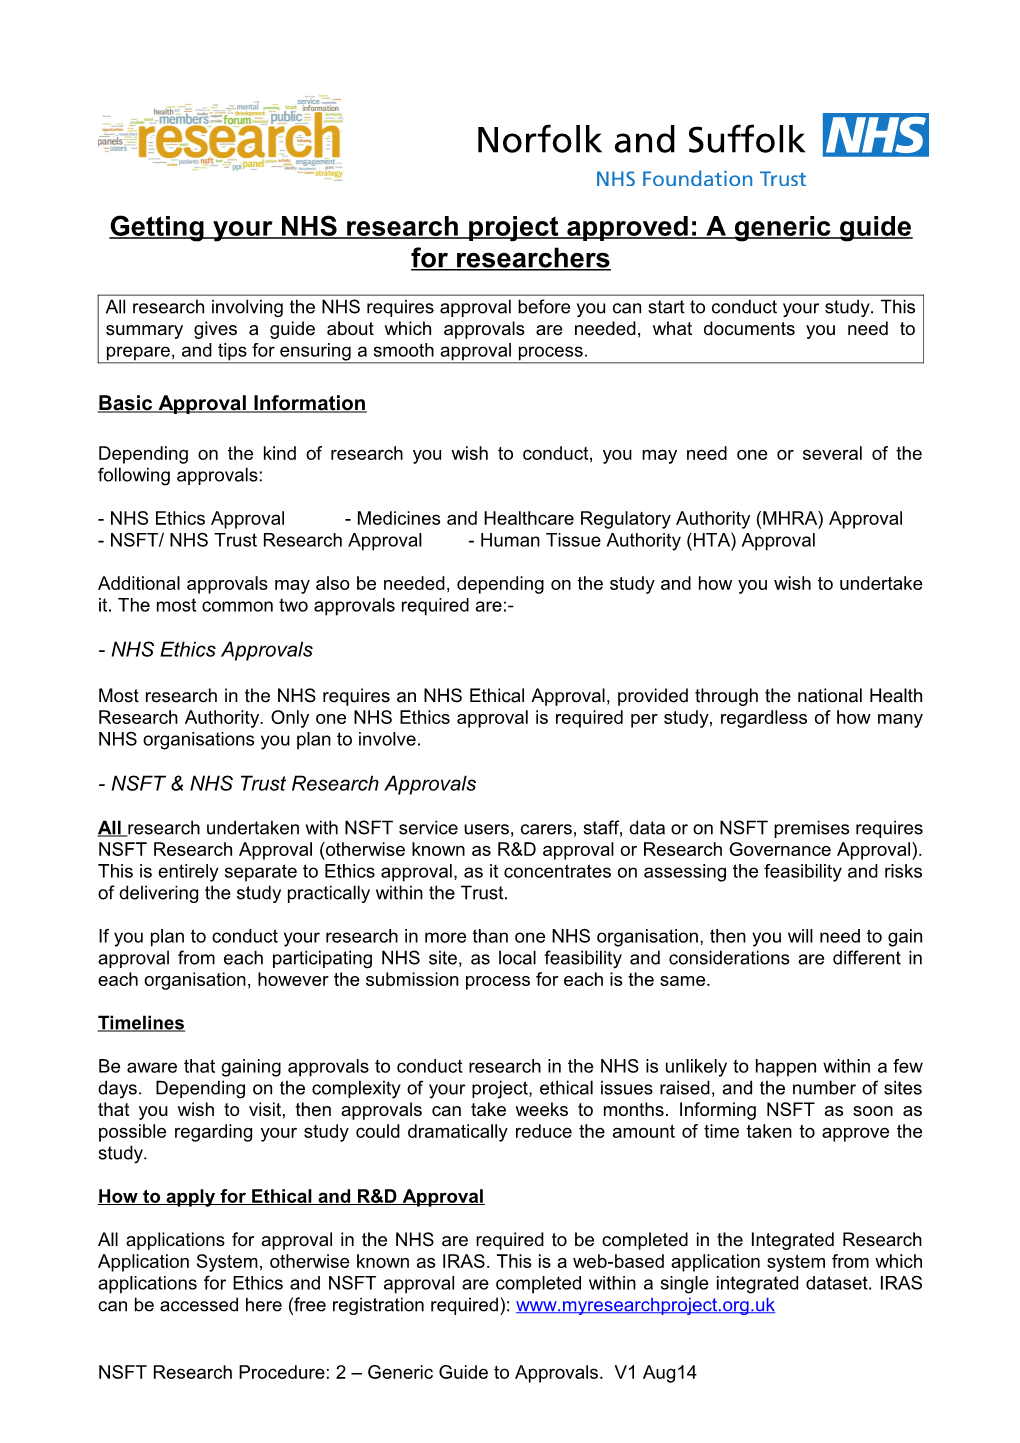 Getting Your NHS Research Project Approved: a Generic Guide for Researchers